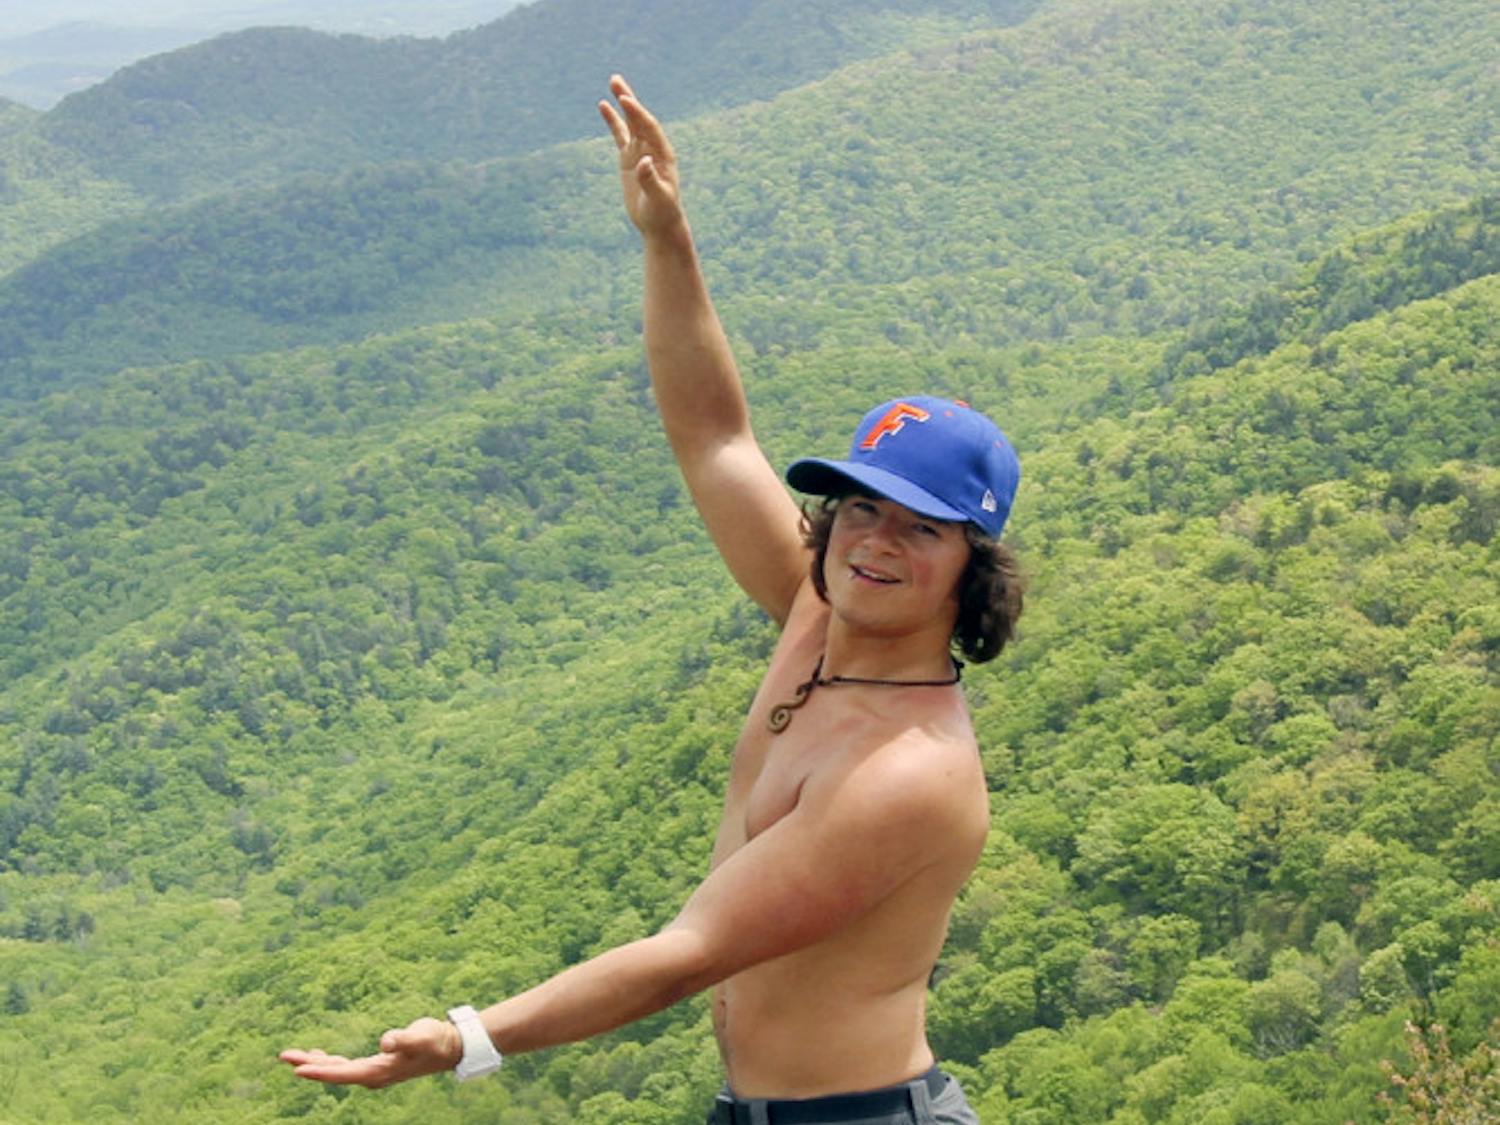 Fillipe DeAndrade, filmmaker and University of Florida alum, poses for a photo. After his graduation from UF in 2012, DeAndrade created an award-winning short film based on his experiences hiking up the Appalachian trail.